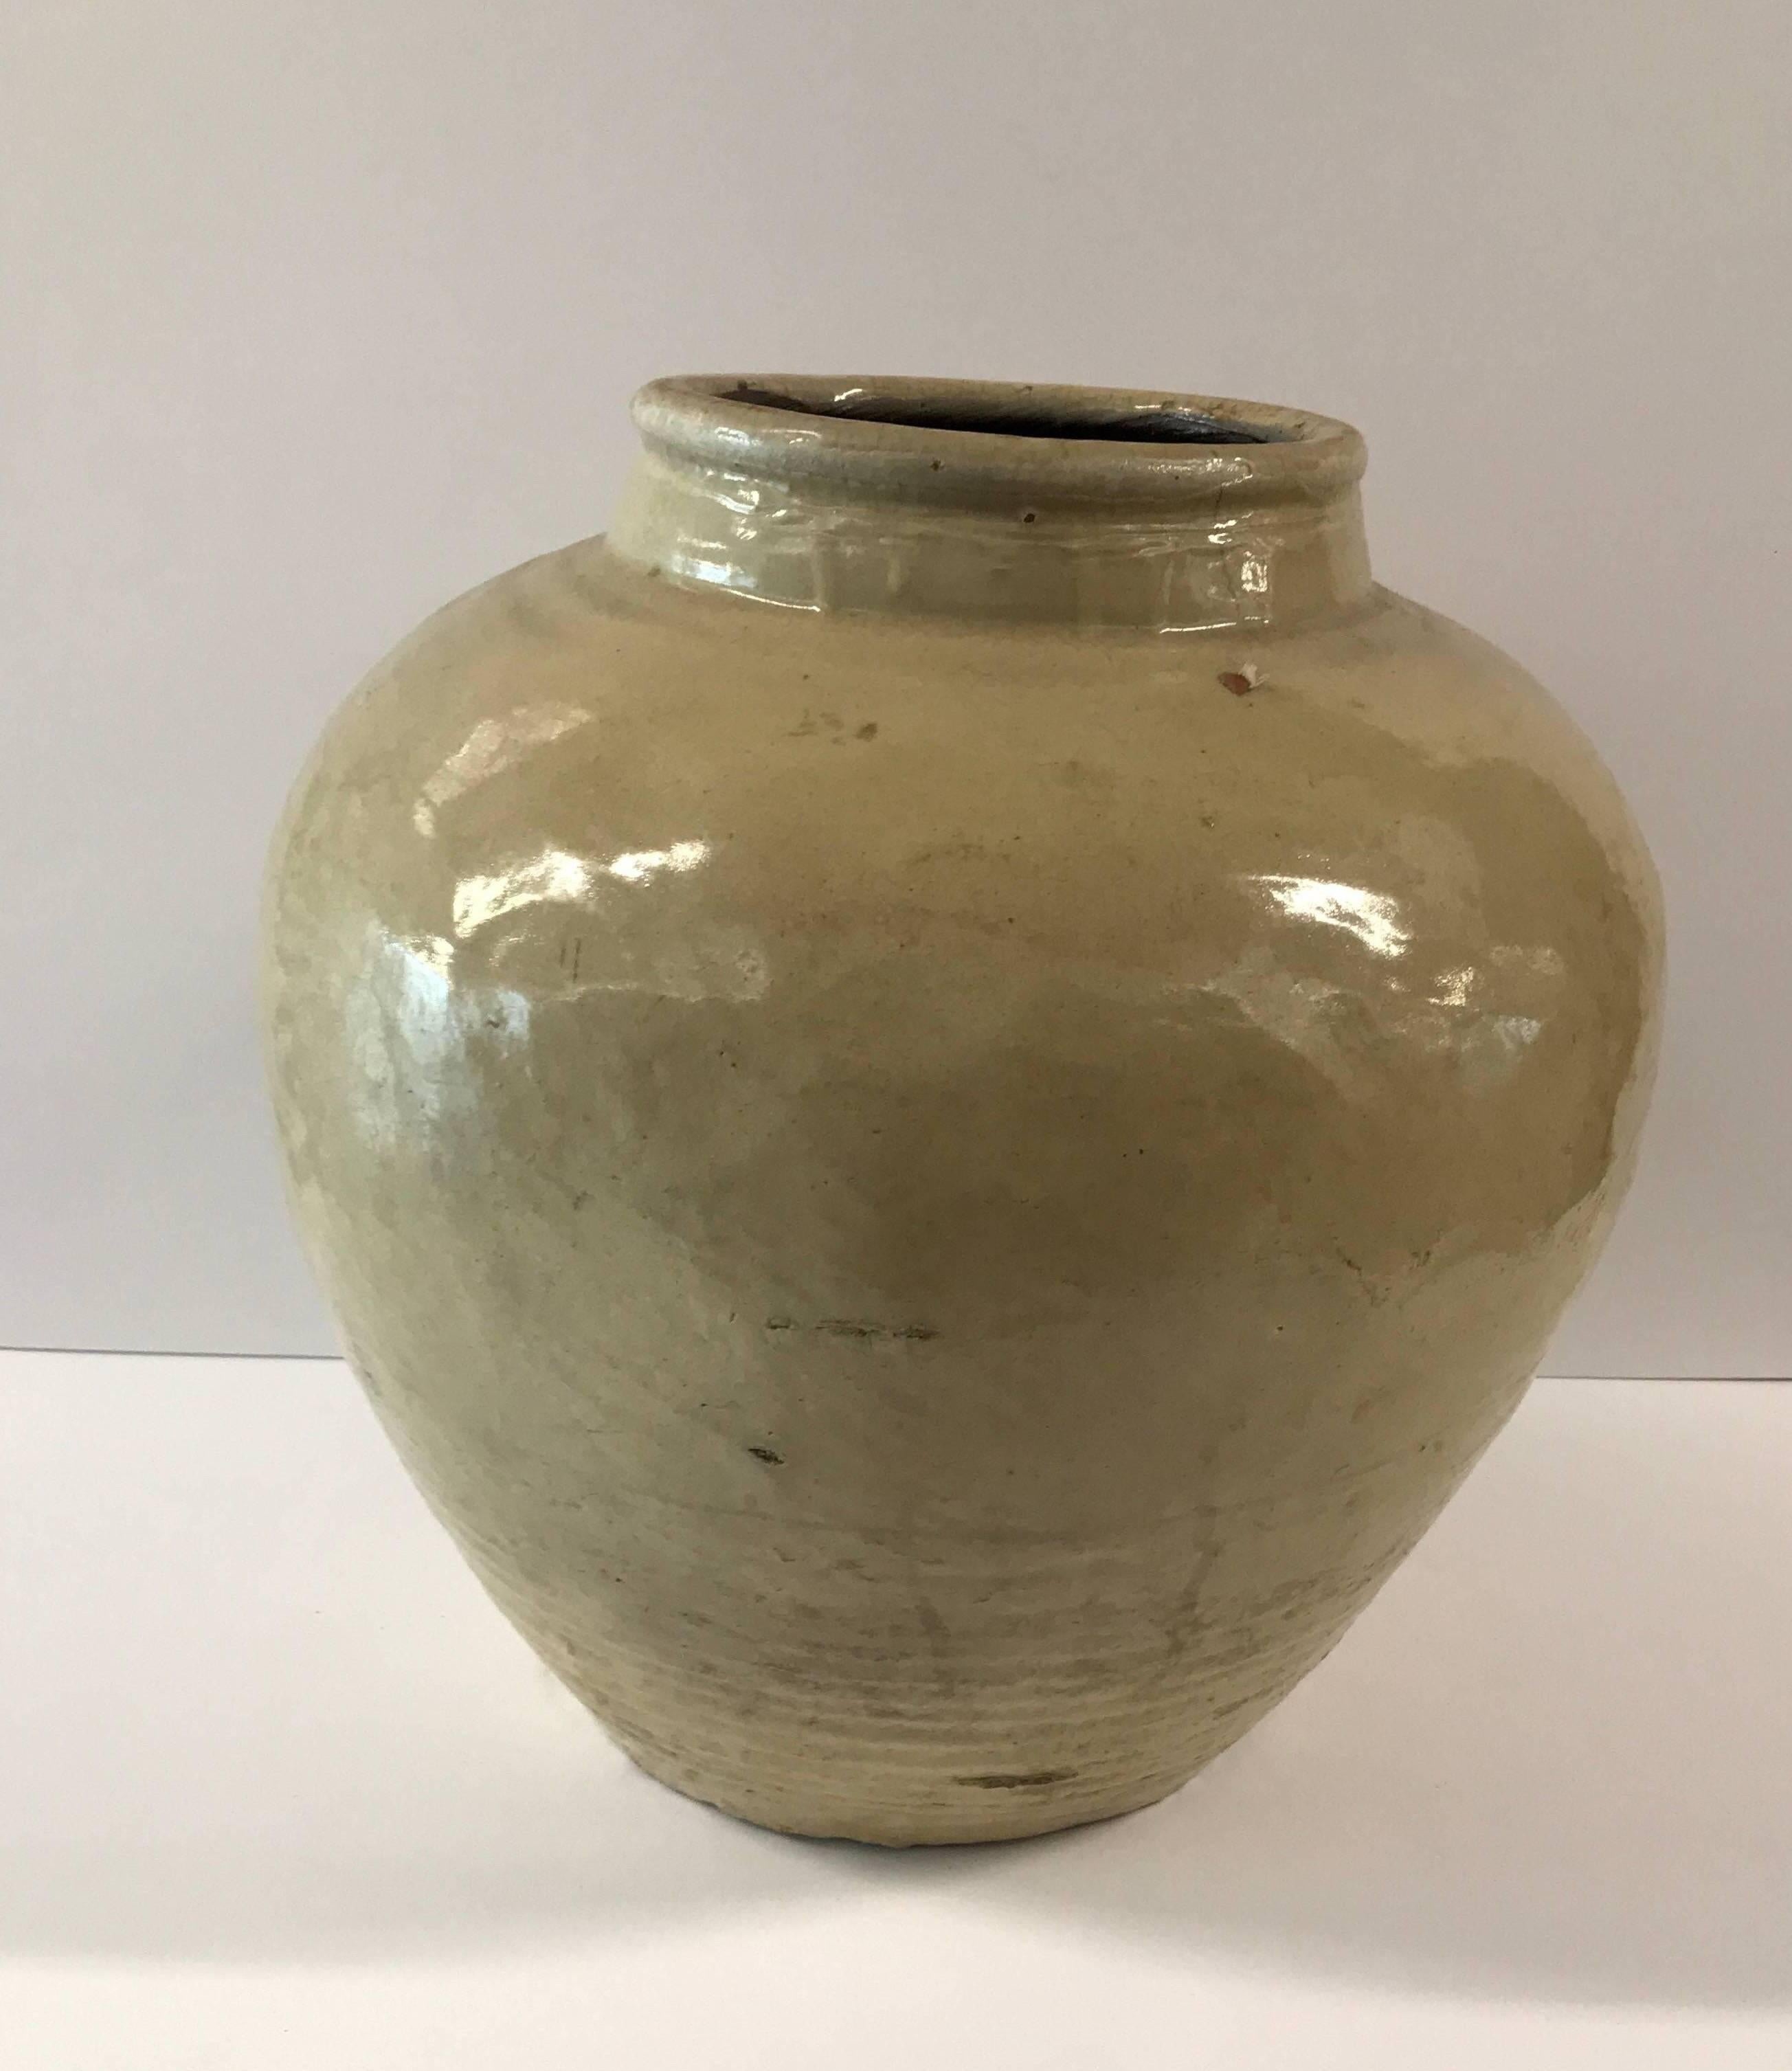 19th century crème or maize colored glazed Chinese pickling jar





Dimensions: 16 in. H x 17 in. diam. with an 8 in. diam. Opening and 9.5 in. diam base.